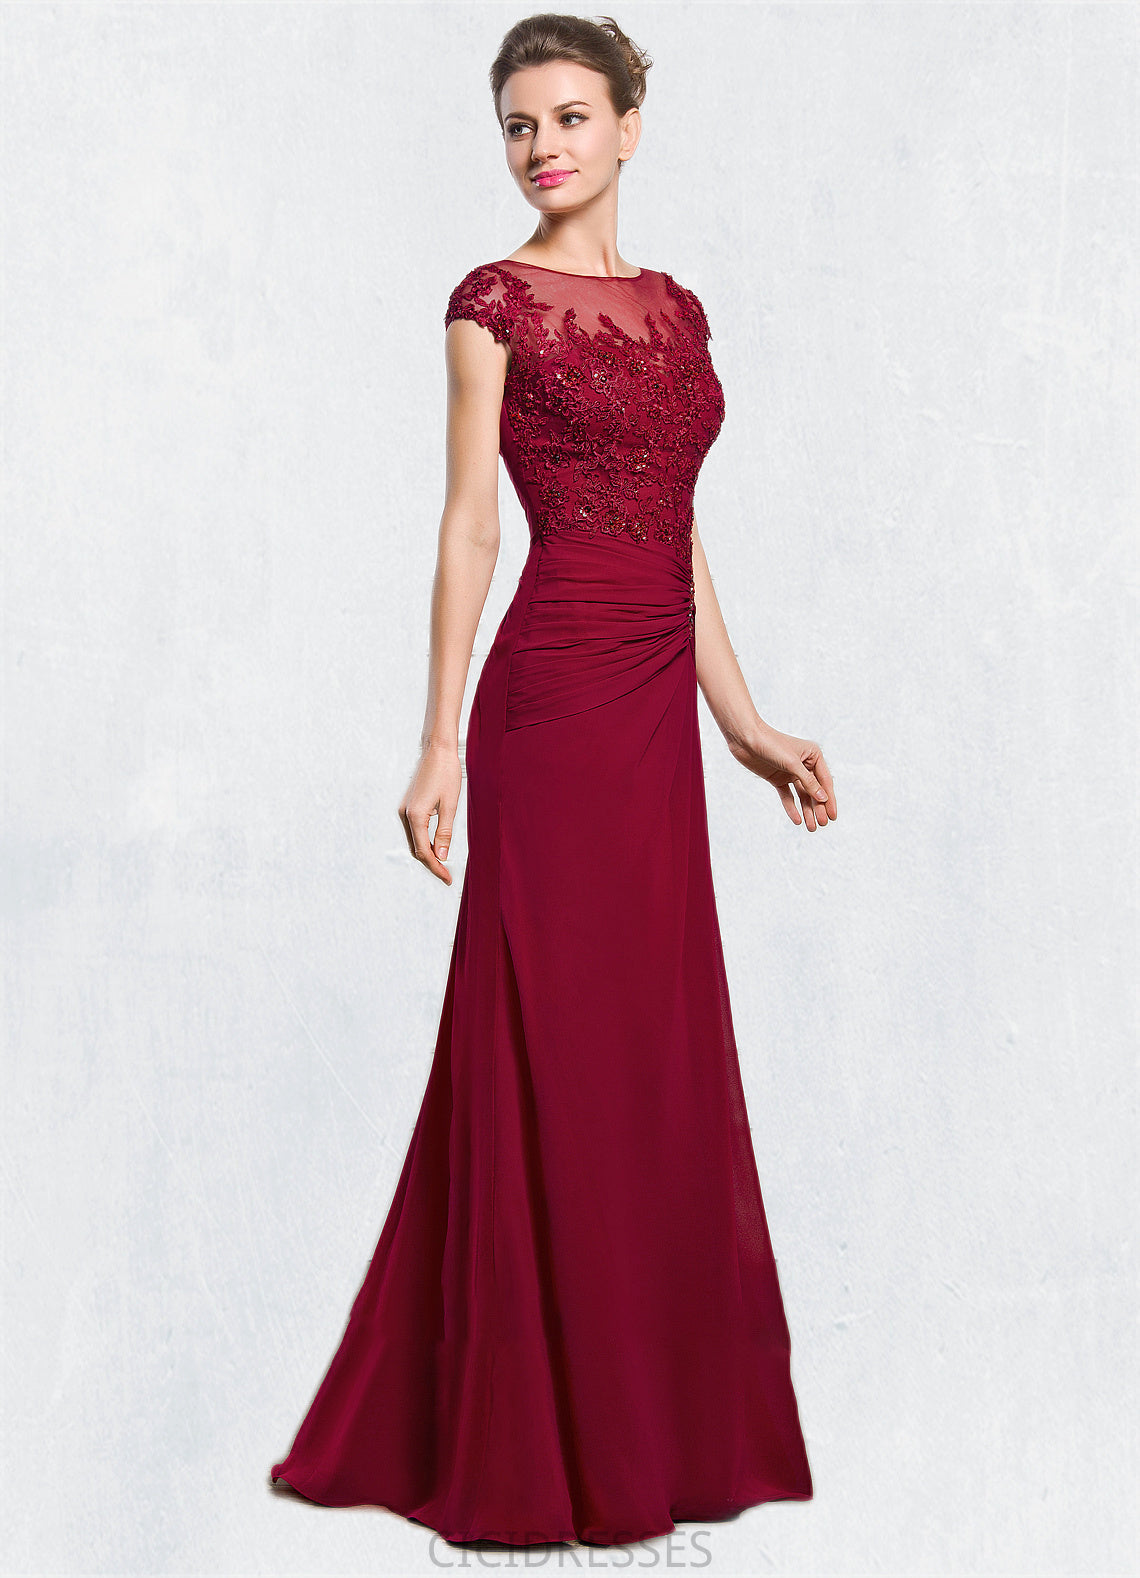 Macy Sheath/Column Scoop Neck Floor-Length Chiffon Mother of the Bride Dress With Ruffle Beading Appliques Lace Sequins Split Front CIC8126P0014549